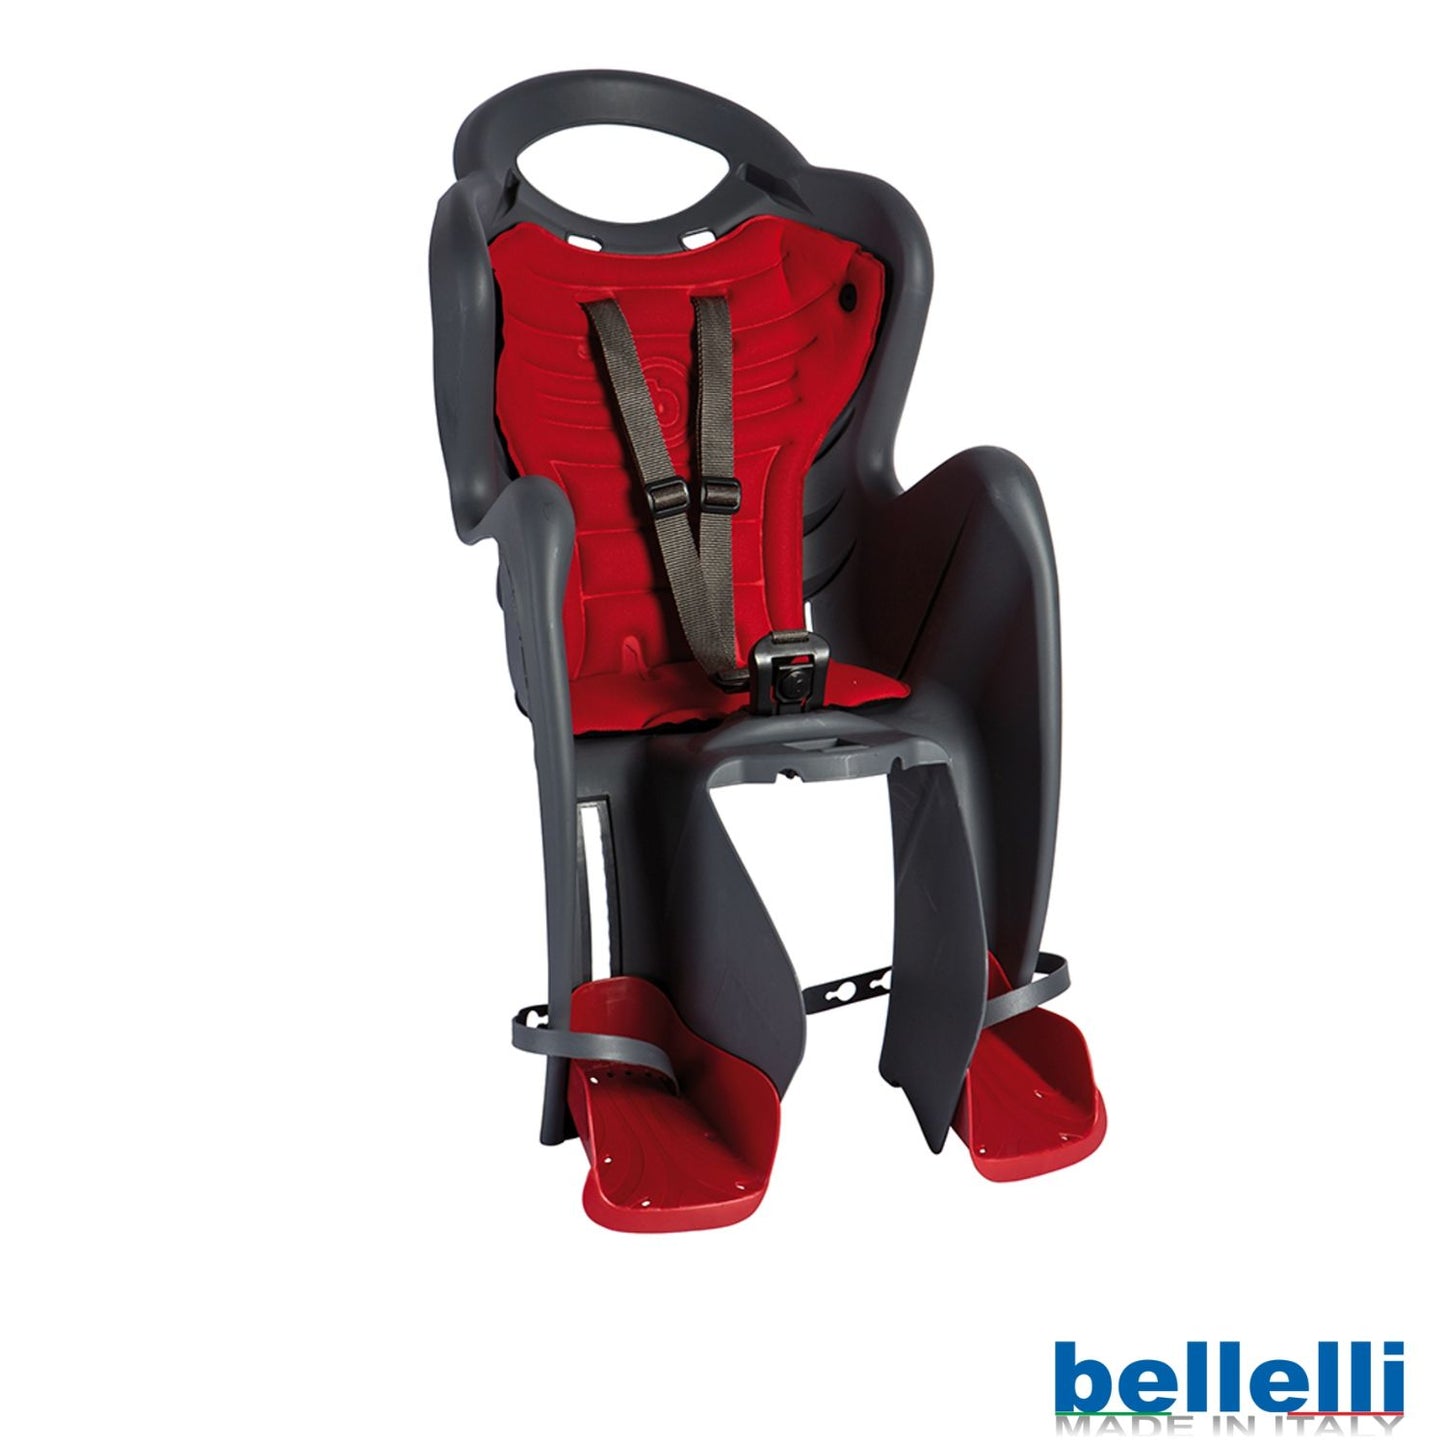 Bellelli - Mr Fox Clamp Bicycle Seat - Rear - up to 22 kg